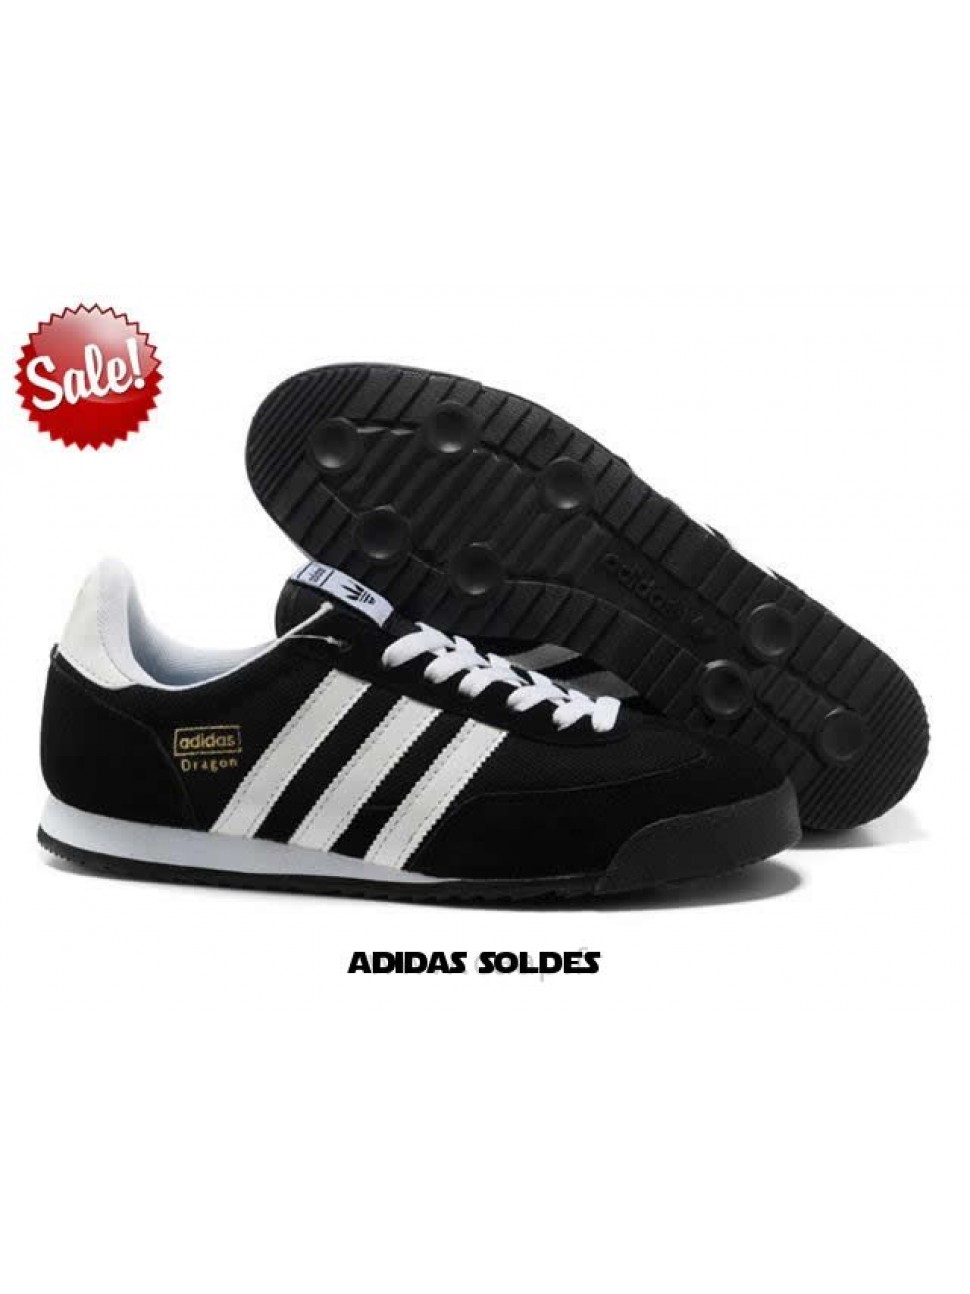 chaussure adidas dragon homme